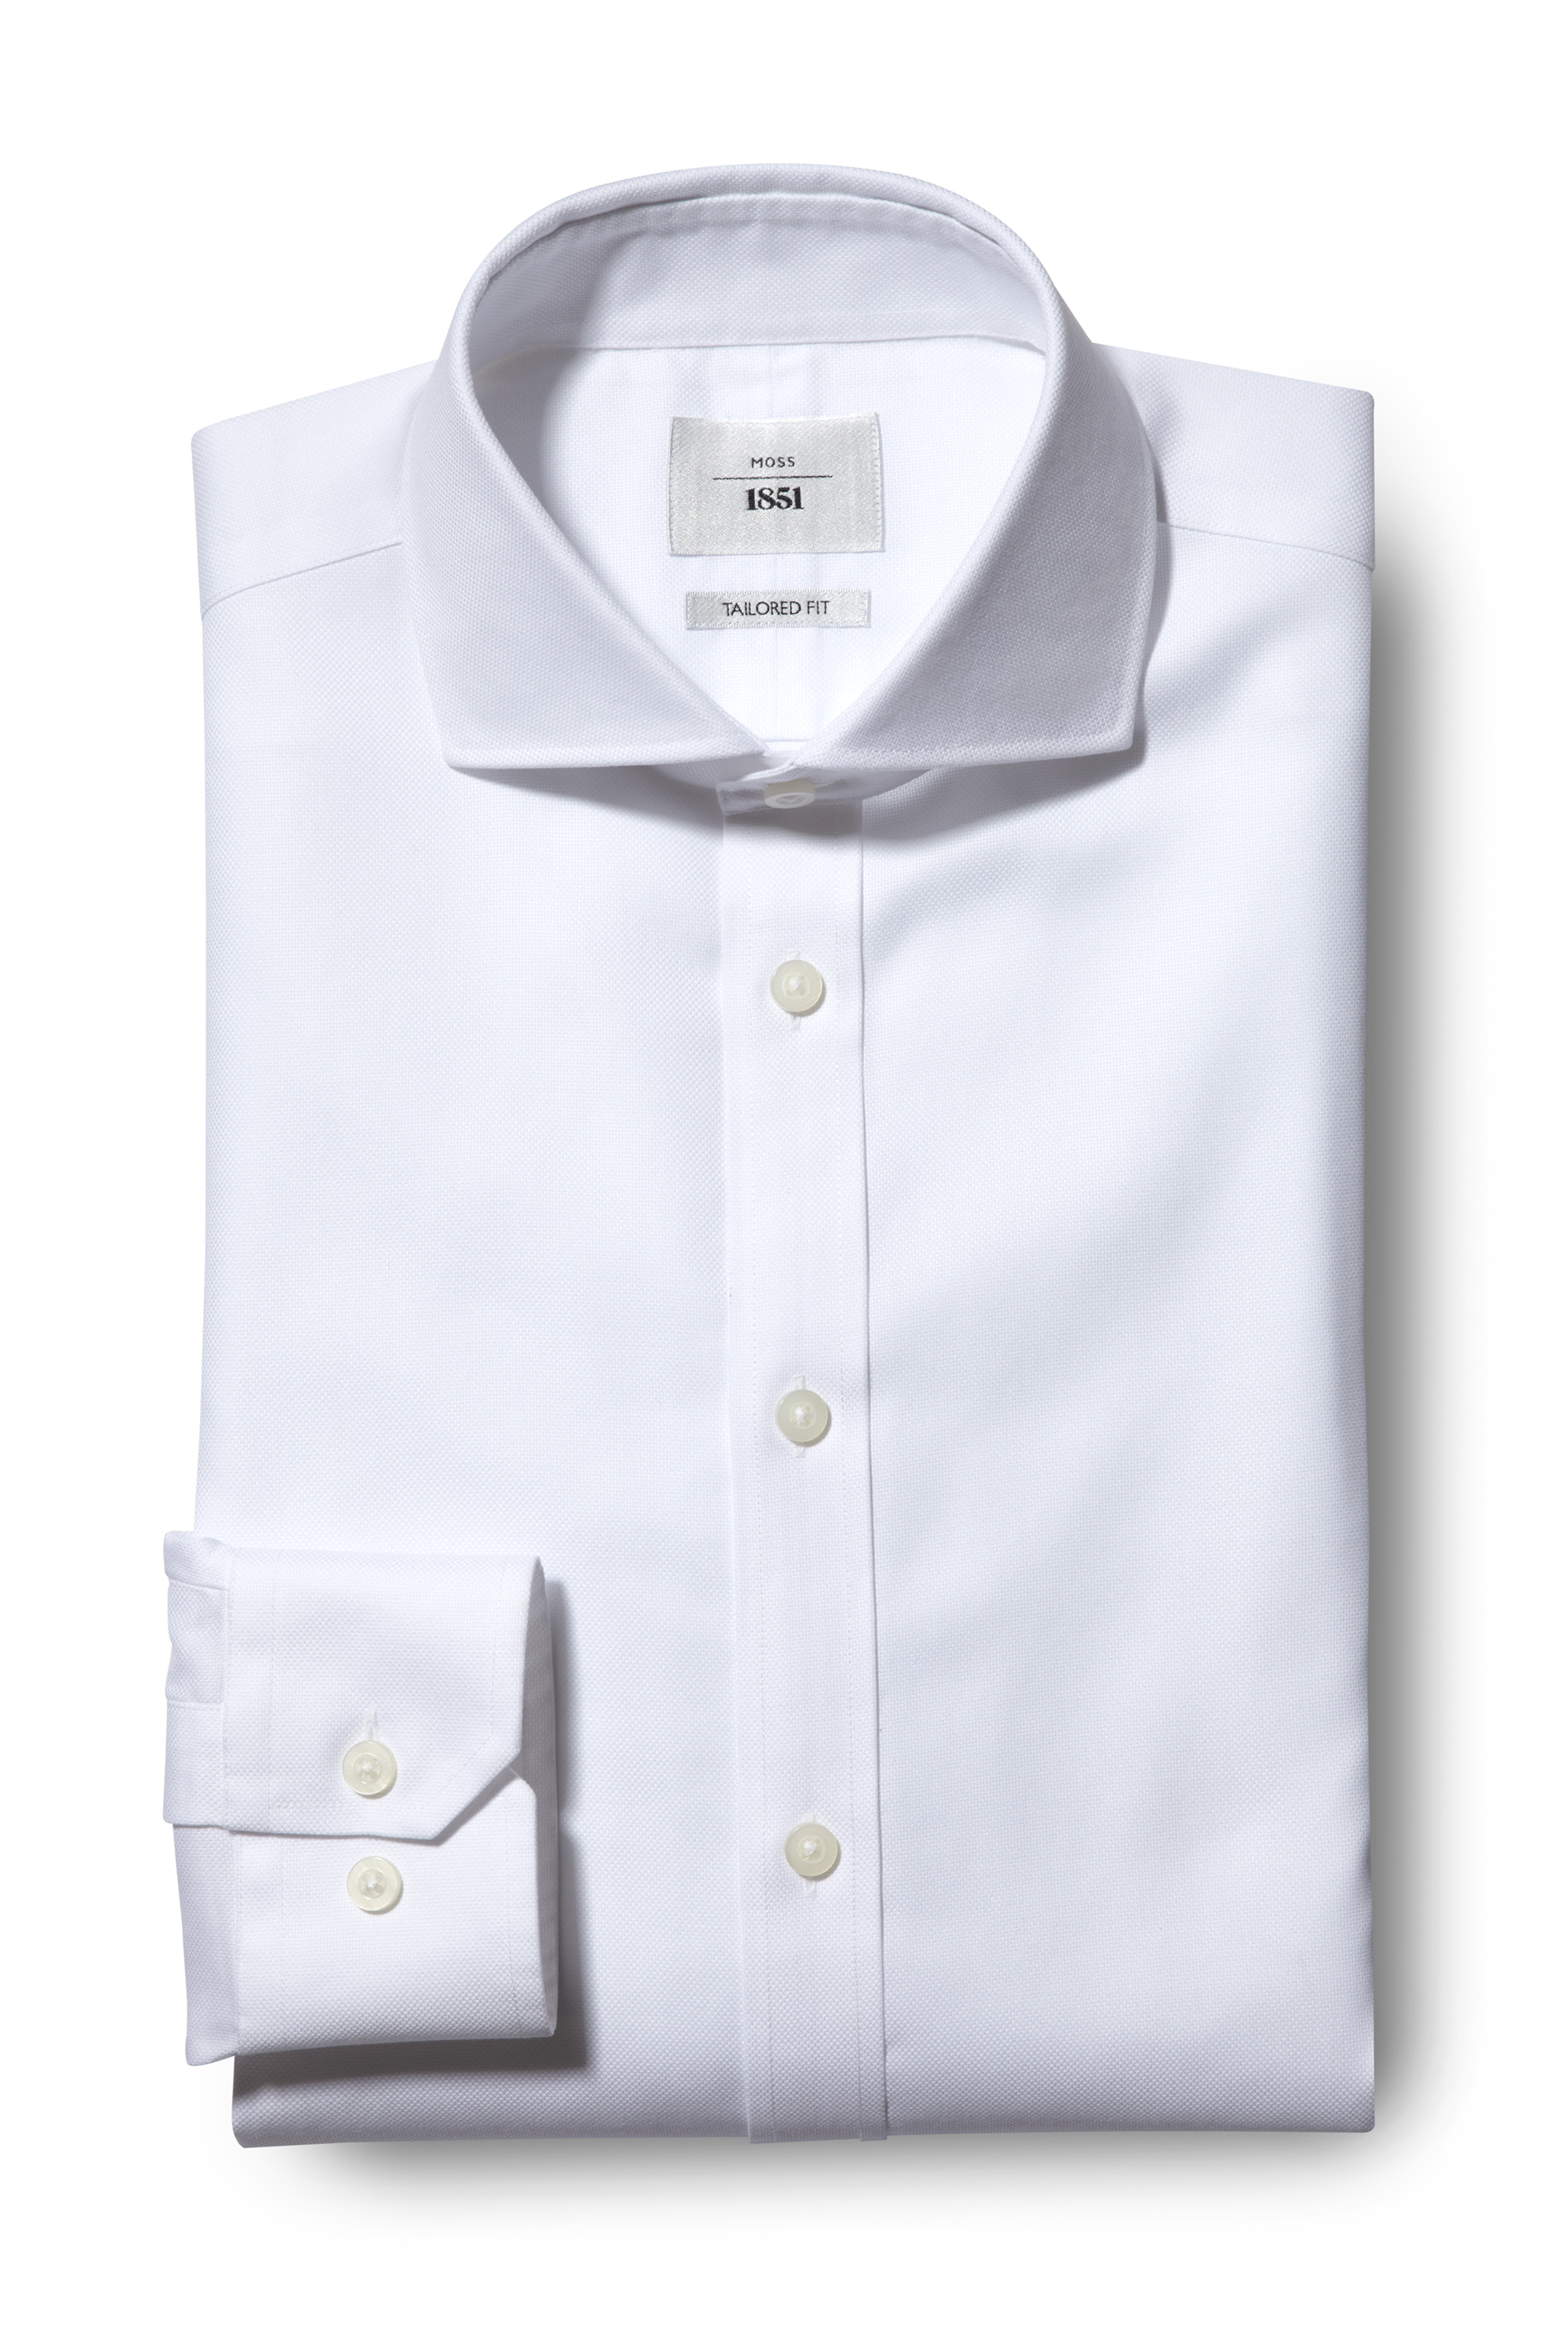 Tailored Fit White Textured Non-Iron Shirt | Buy Online at Moss